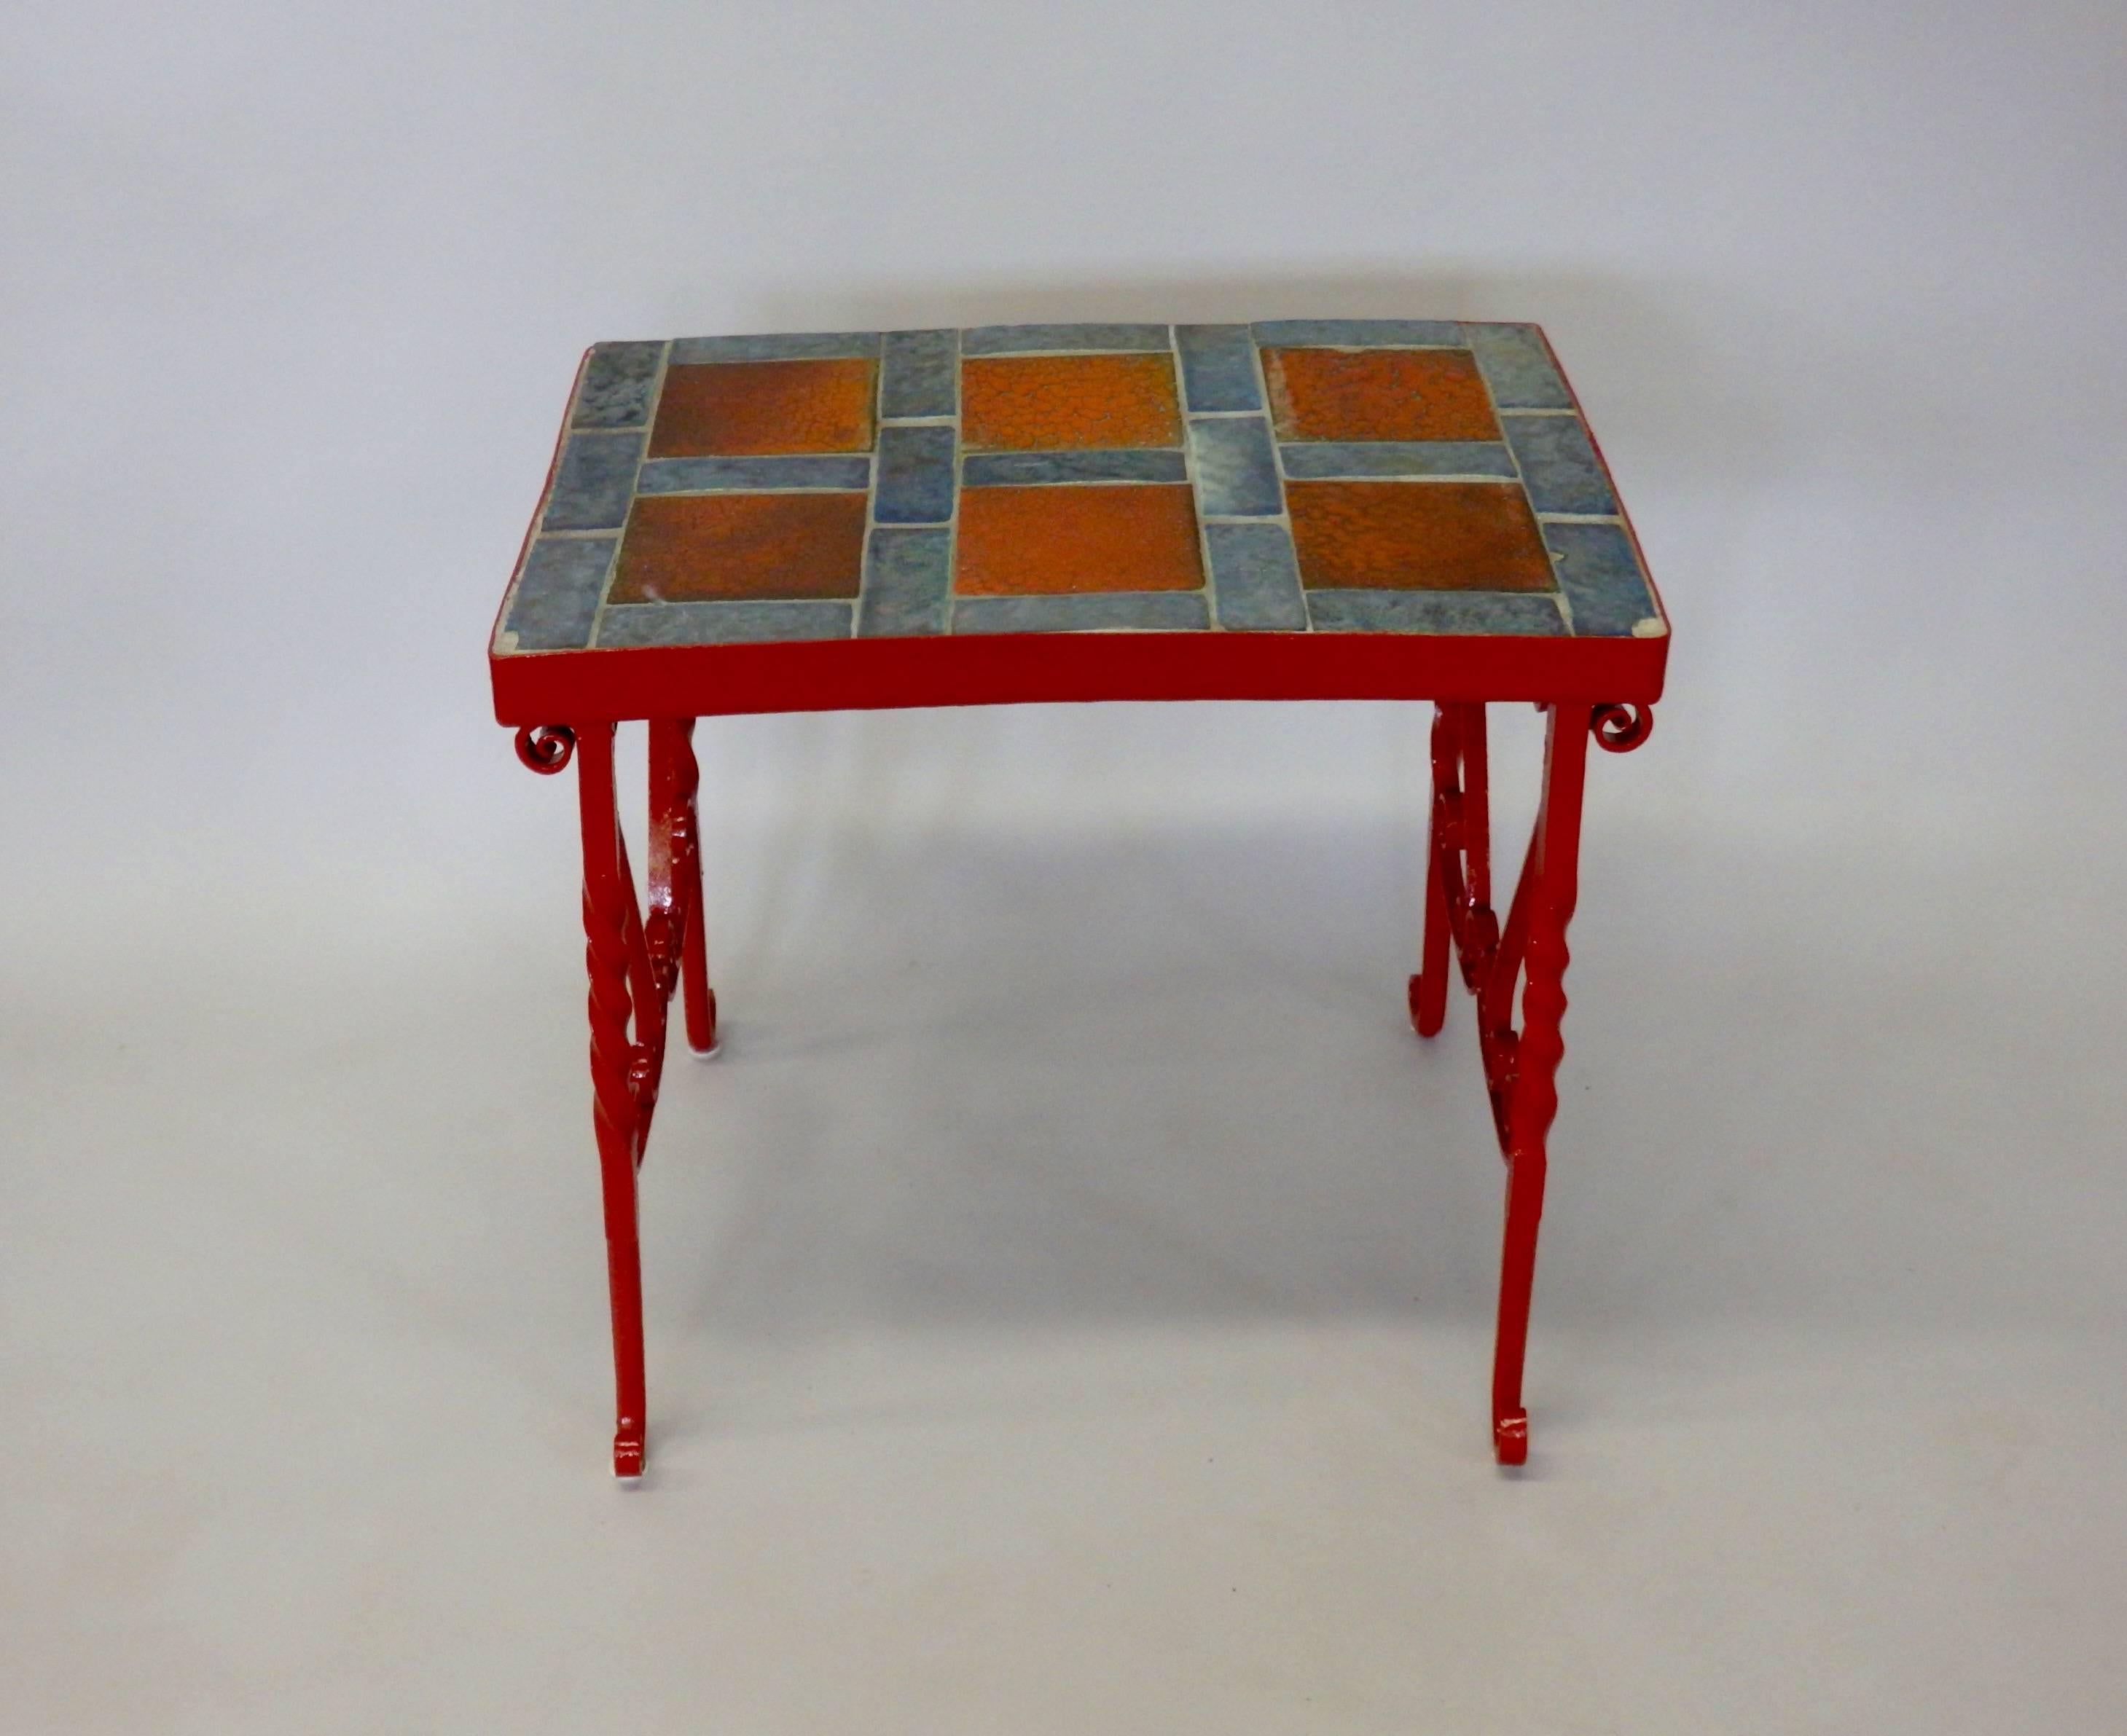 Appears to be studio built Folk Art style table. Table made up with California tiles some chipped before being set in cement top on heavy wrought iron legs. Legs painted red.